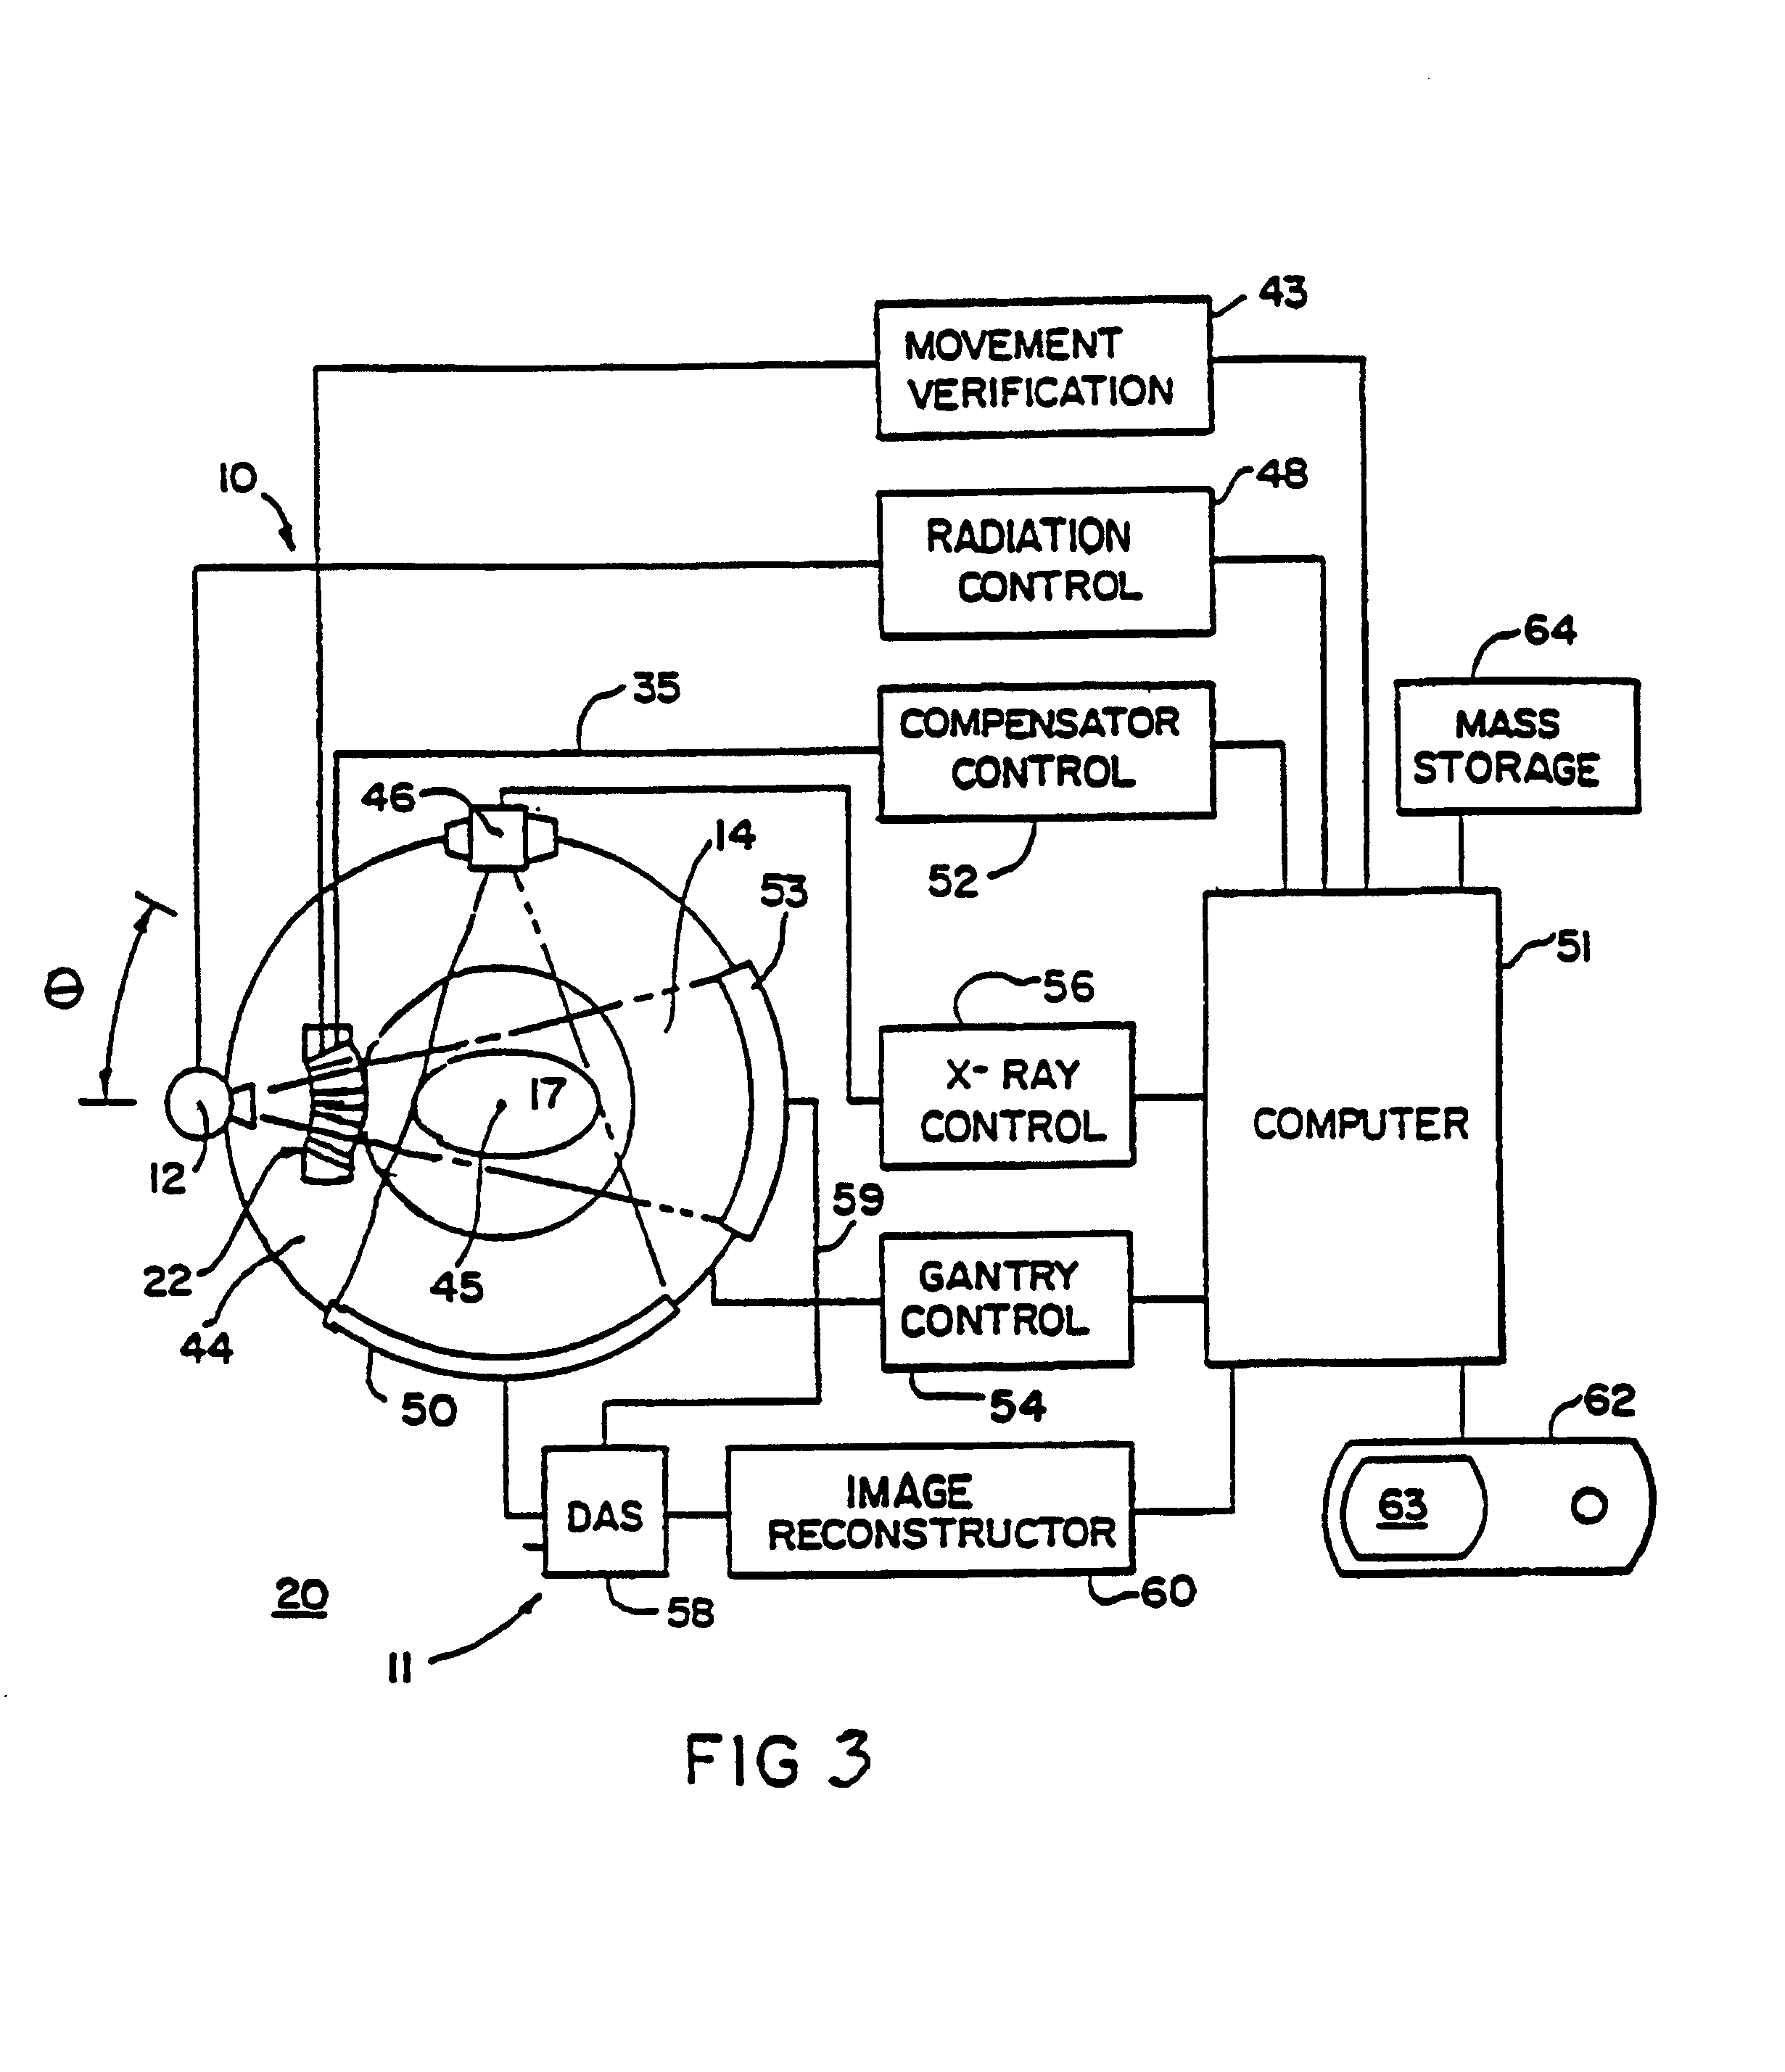 Method for preparing a radiation therapy plan